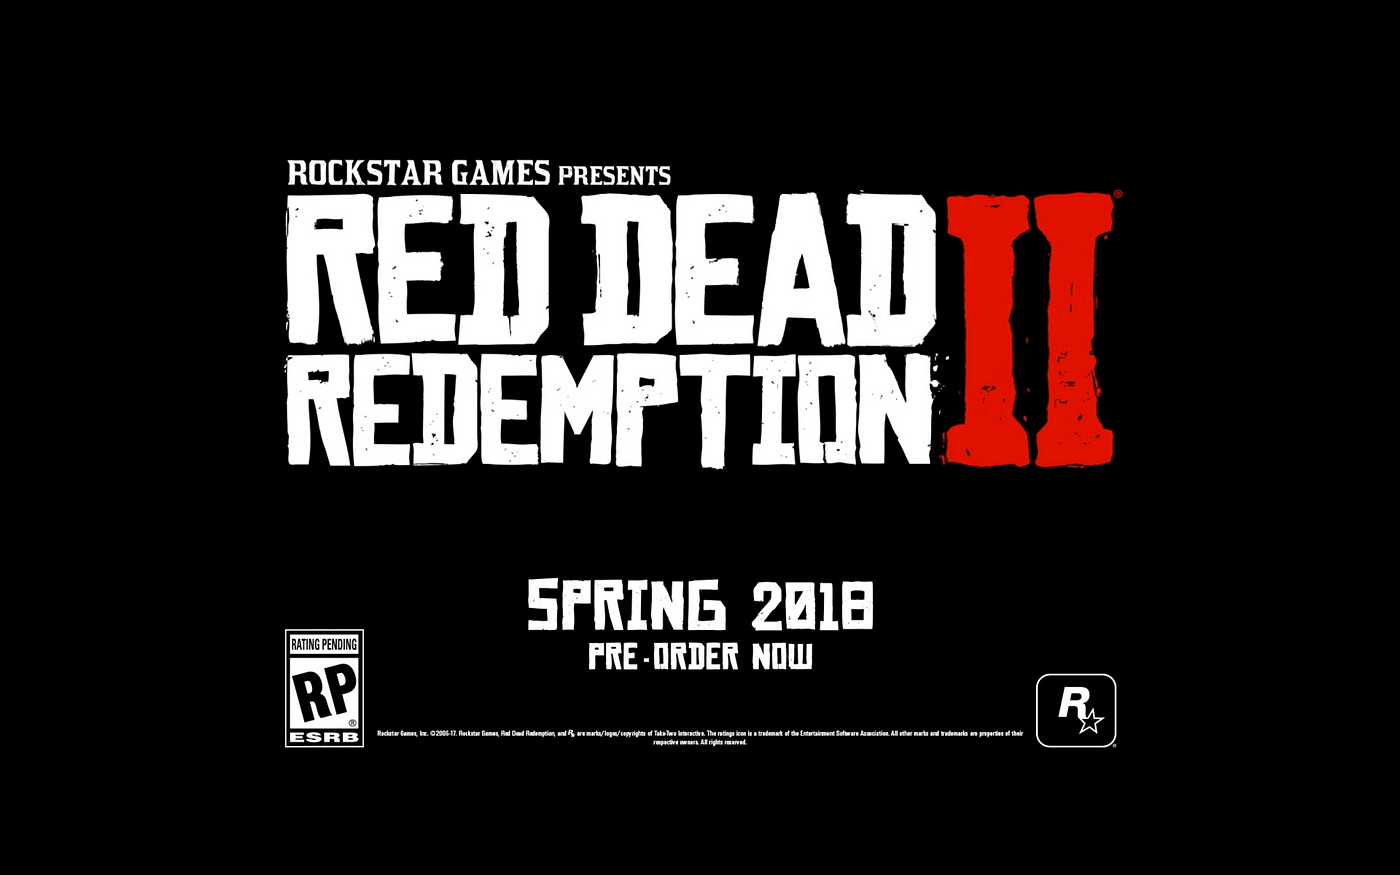 Take 2 games PS4 Red Dead Redemption II